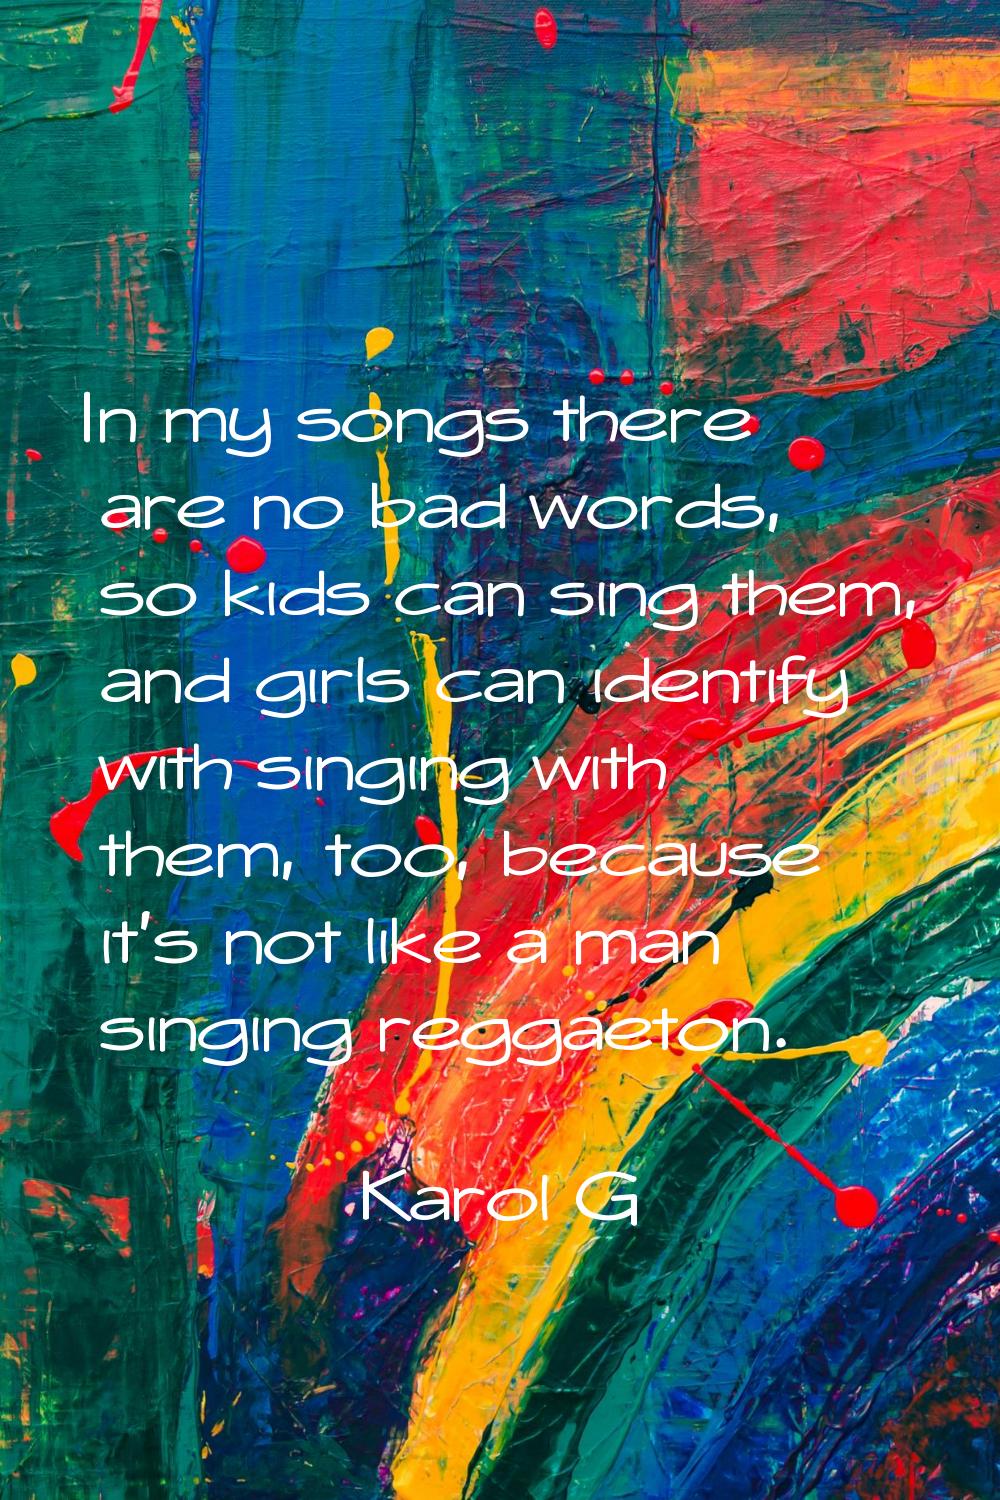 In my songs there are no bad words, so kids can sing them, and girls can identify with singing with